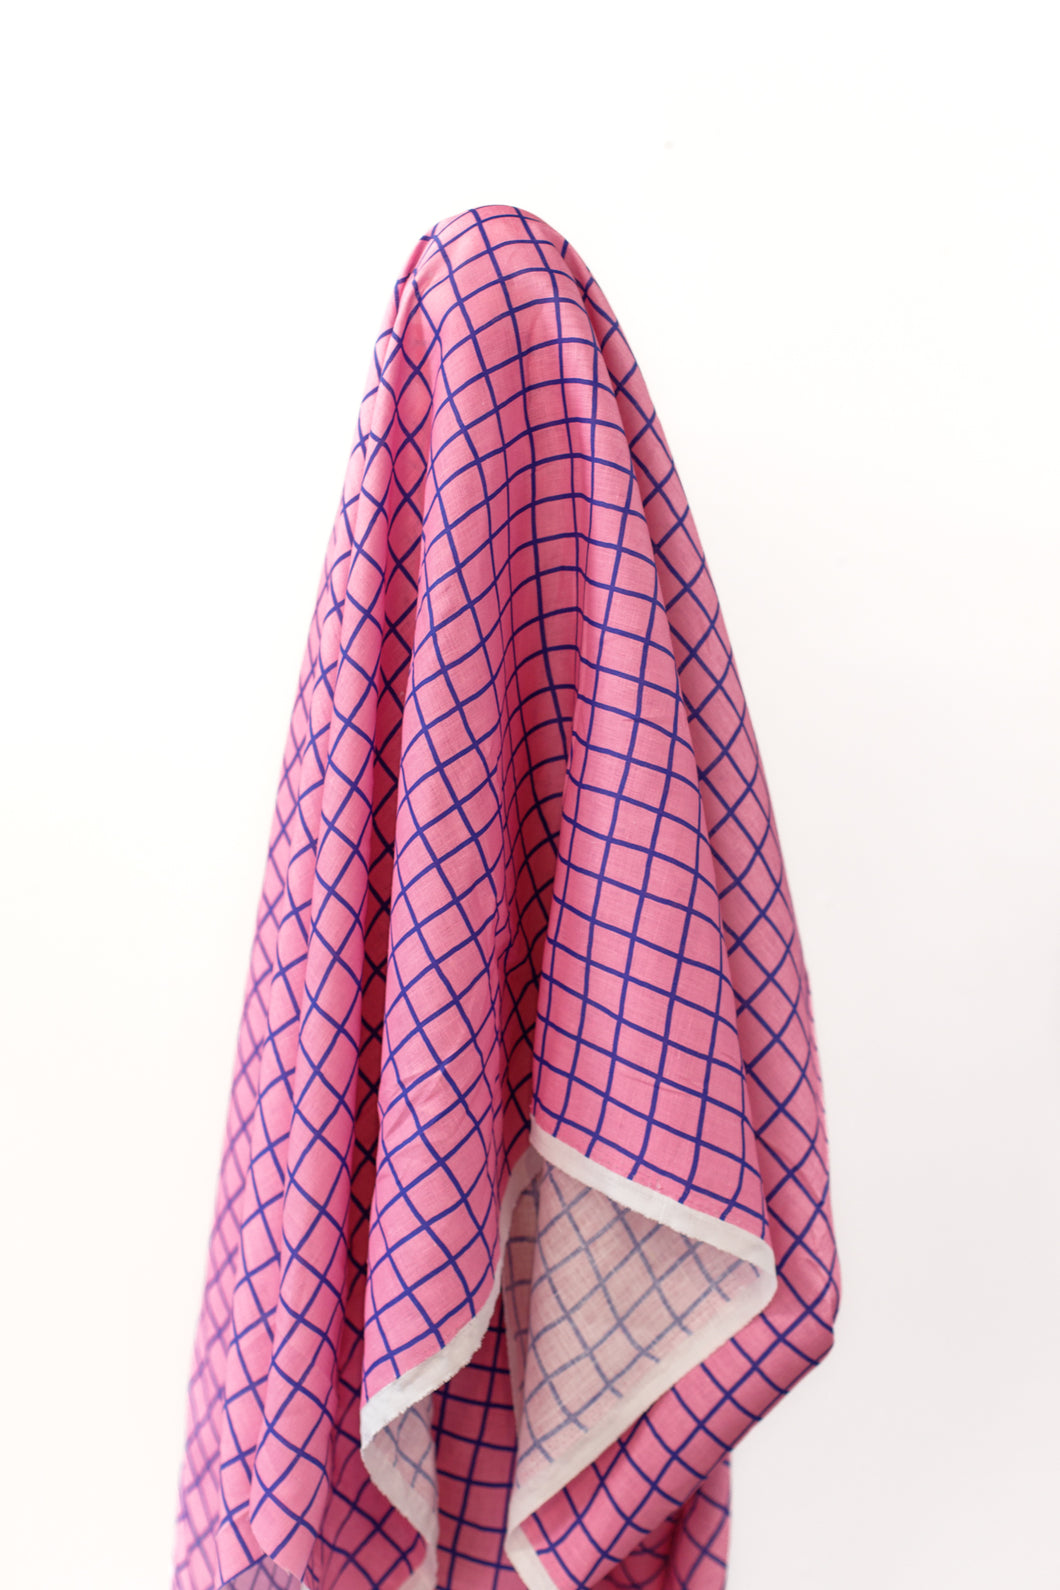 Autumn Vibes 100% Tencel Pink Check 140 cm wide $28 pm